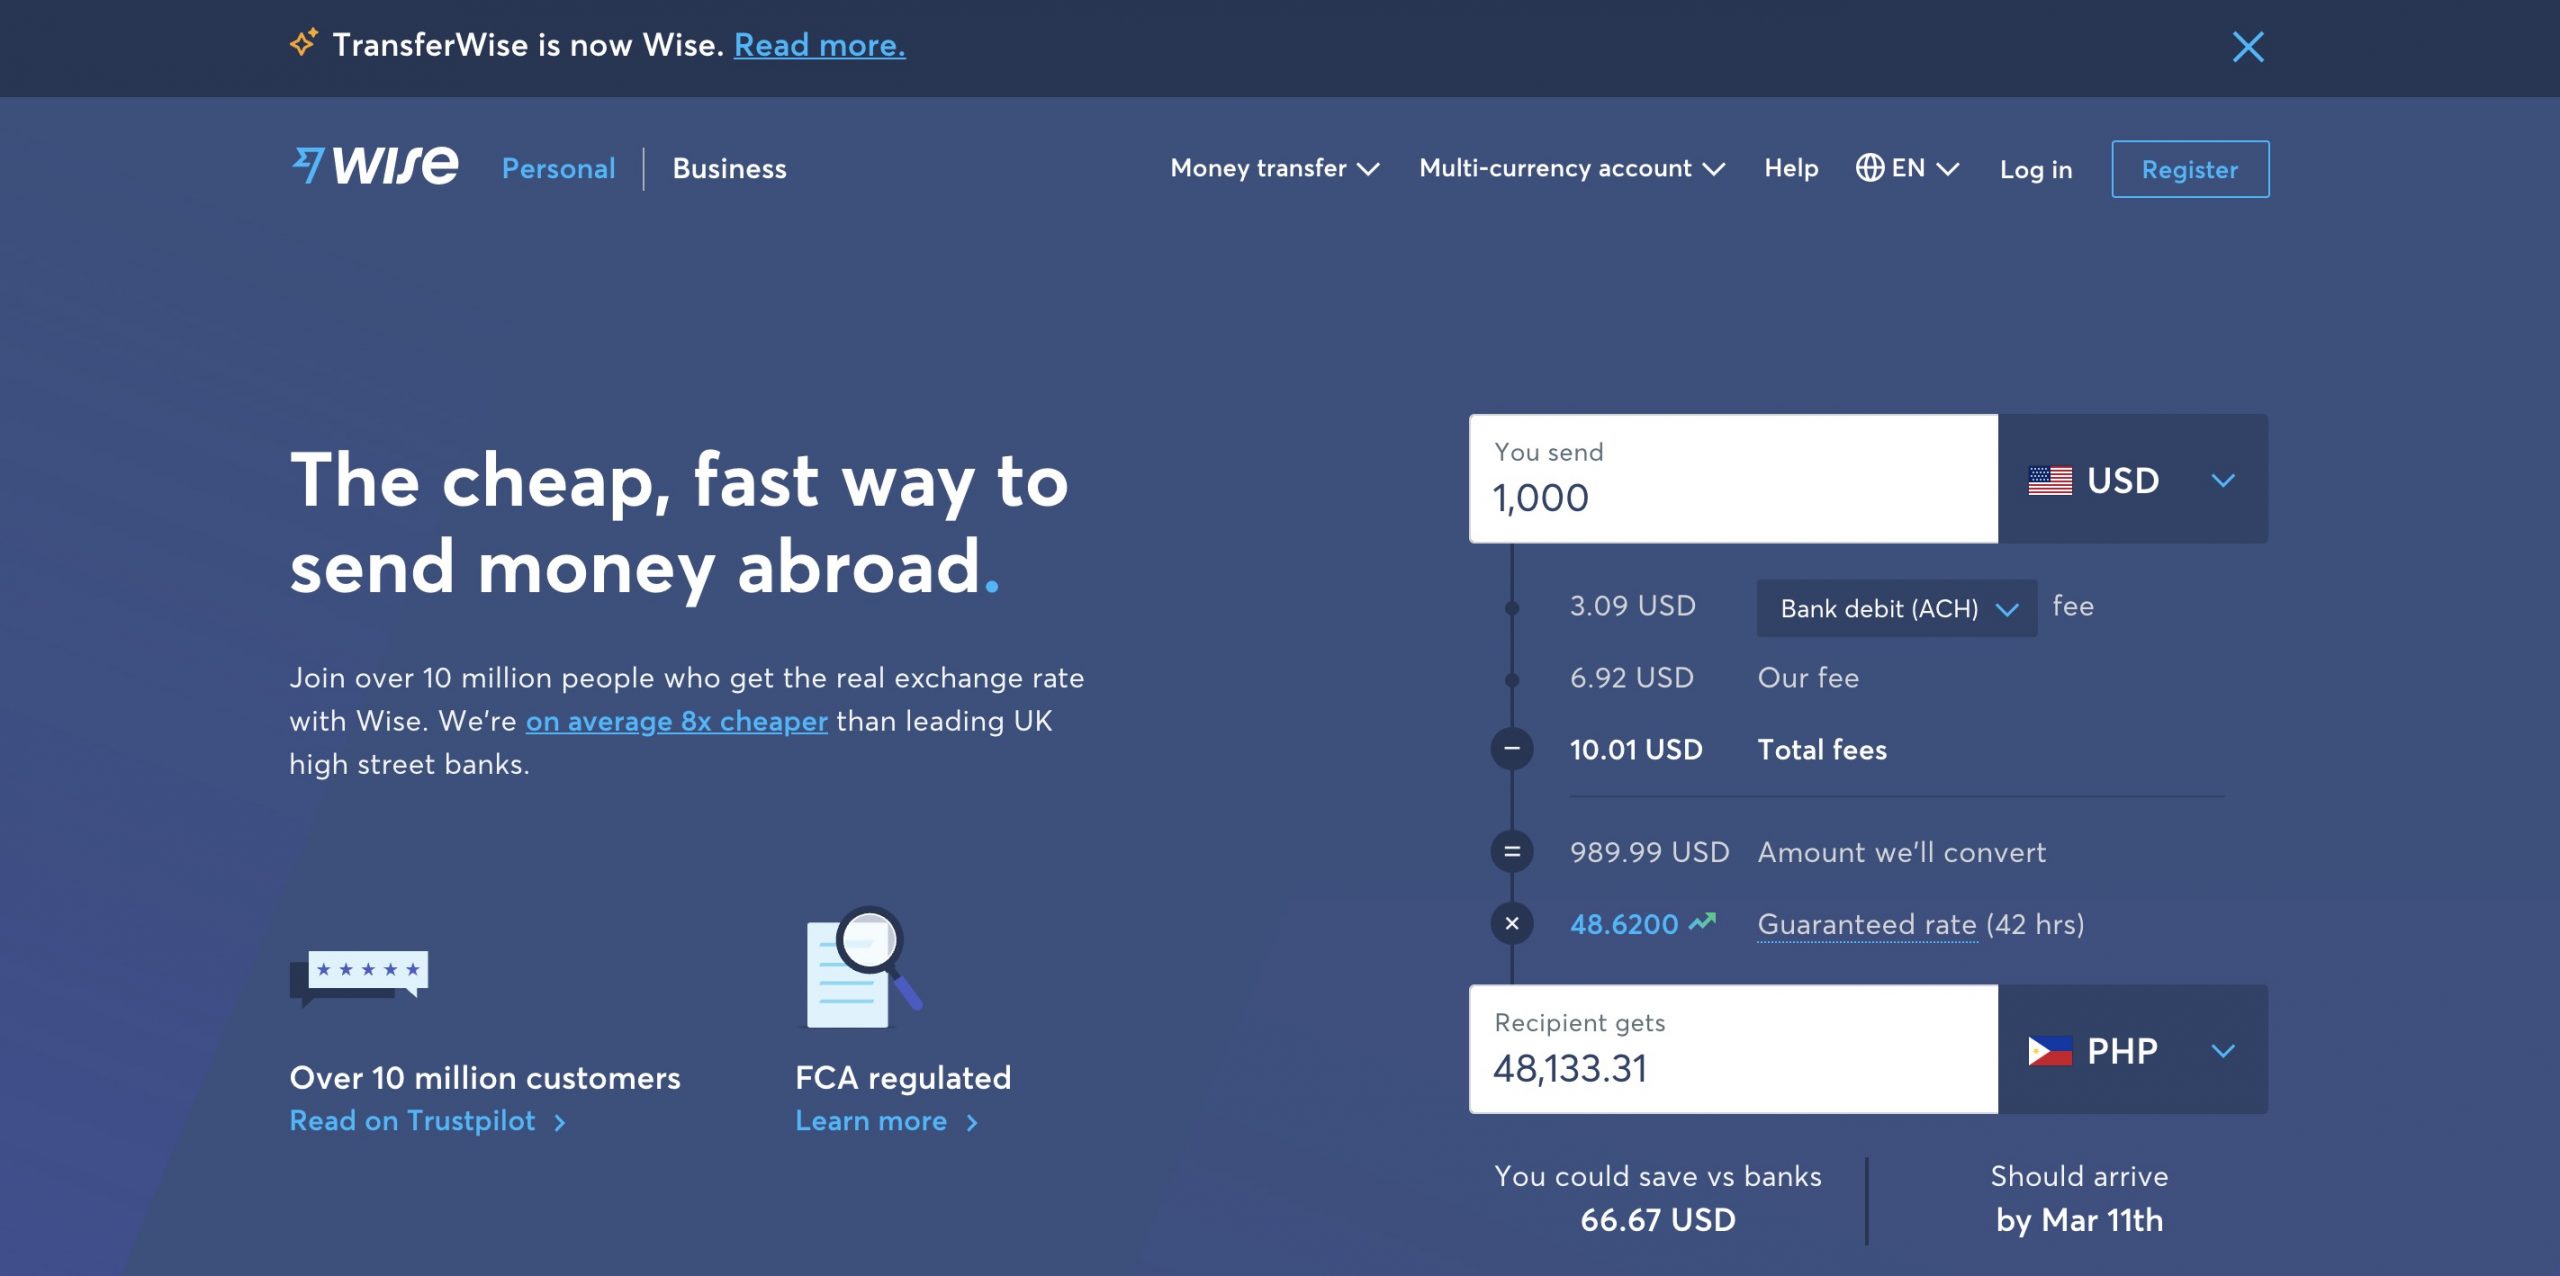 Wise/TransferWise Review: Cheapest Way To Send Money Overseas?